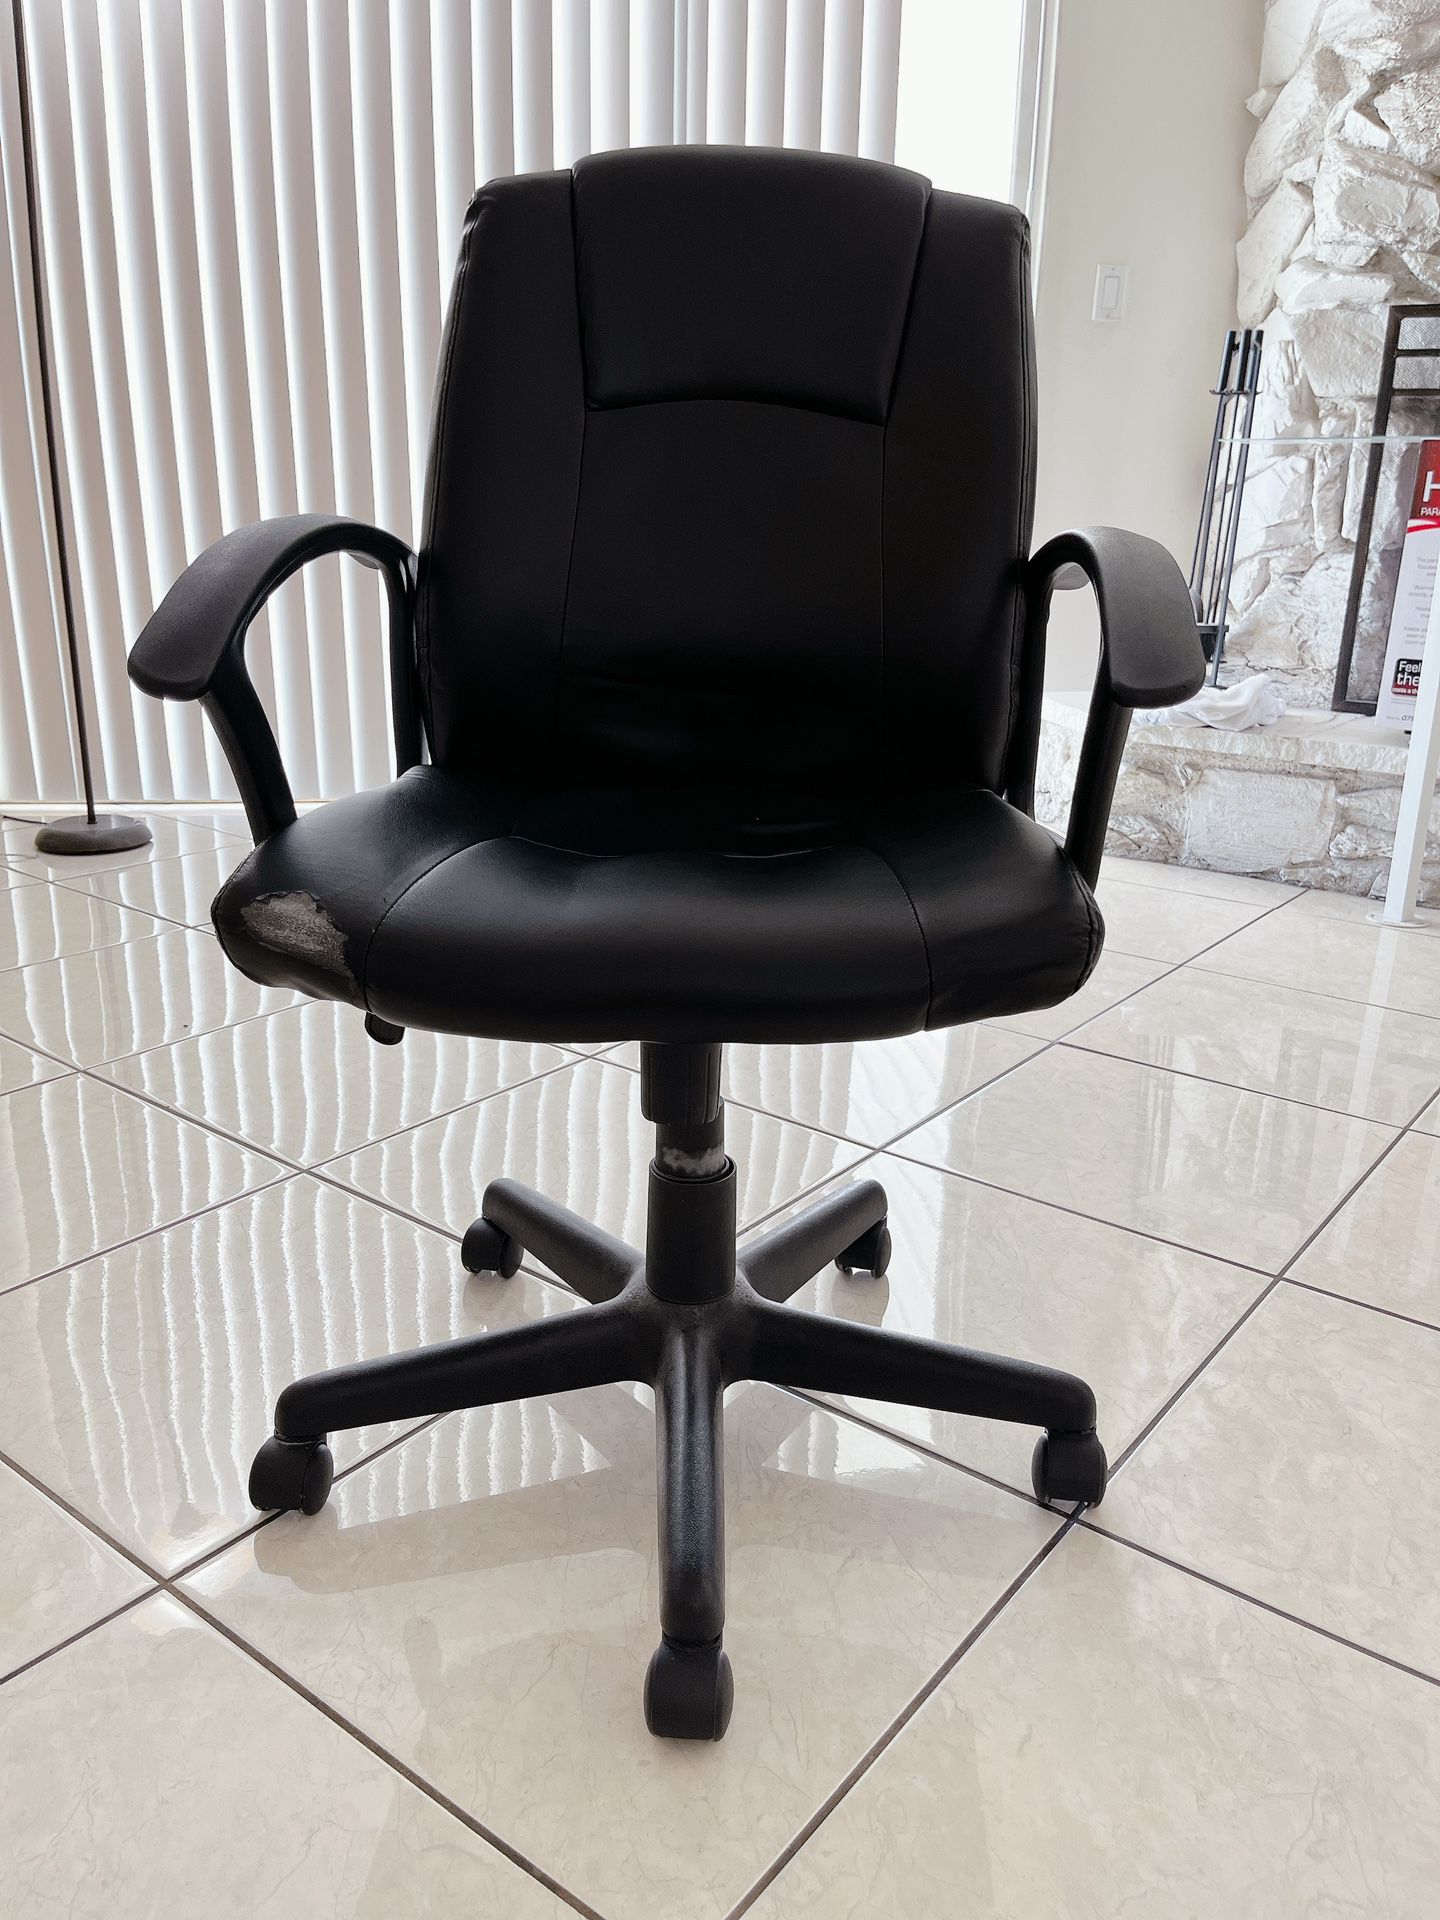 Free Office Desk Chair 